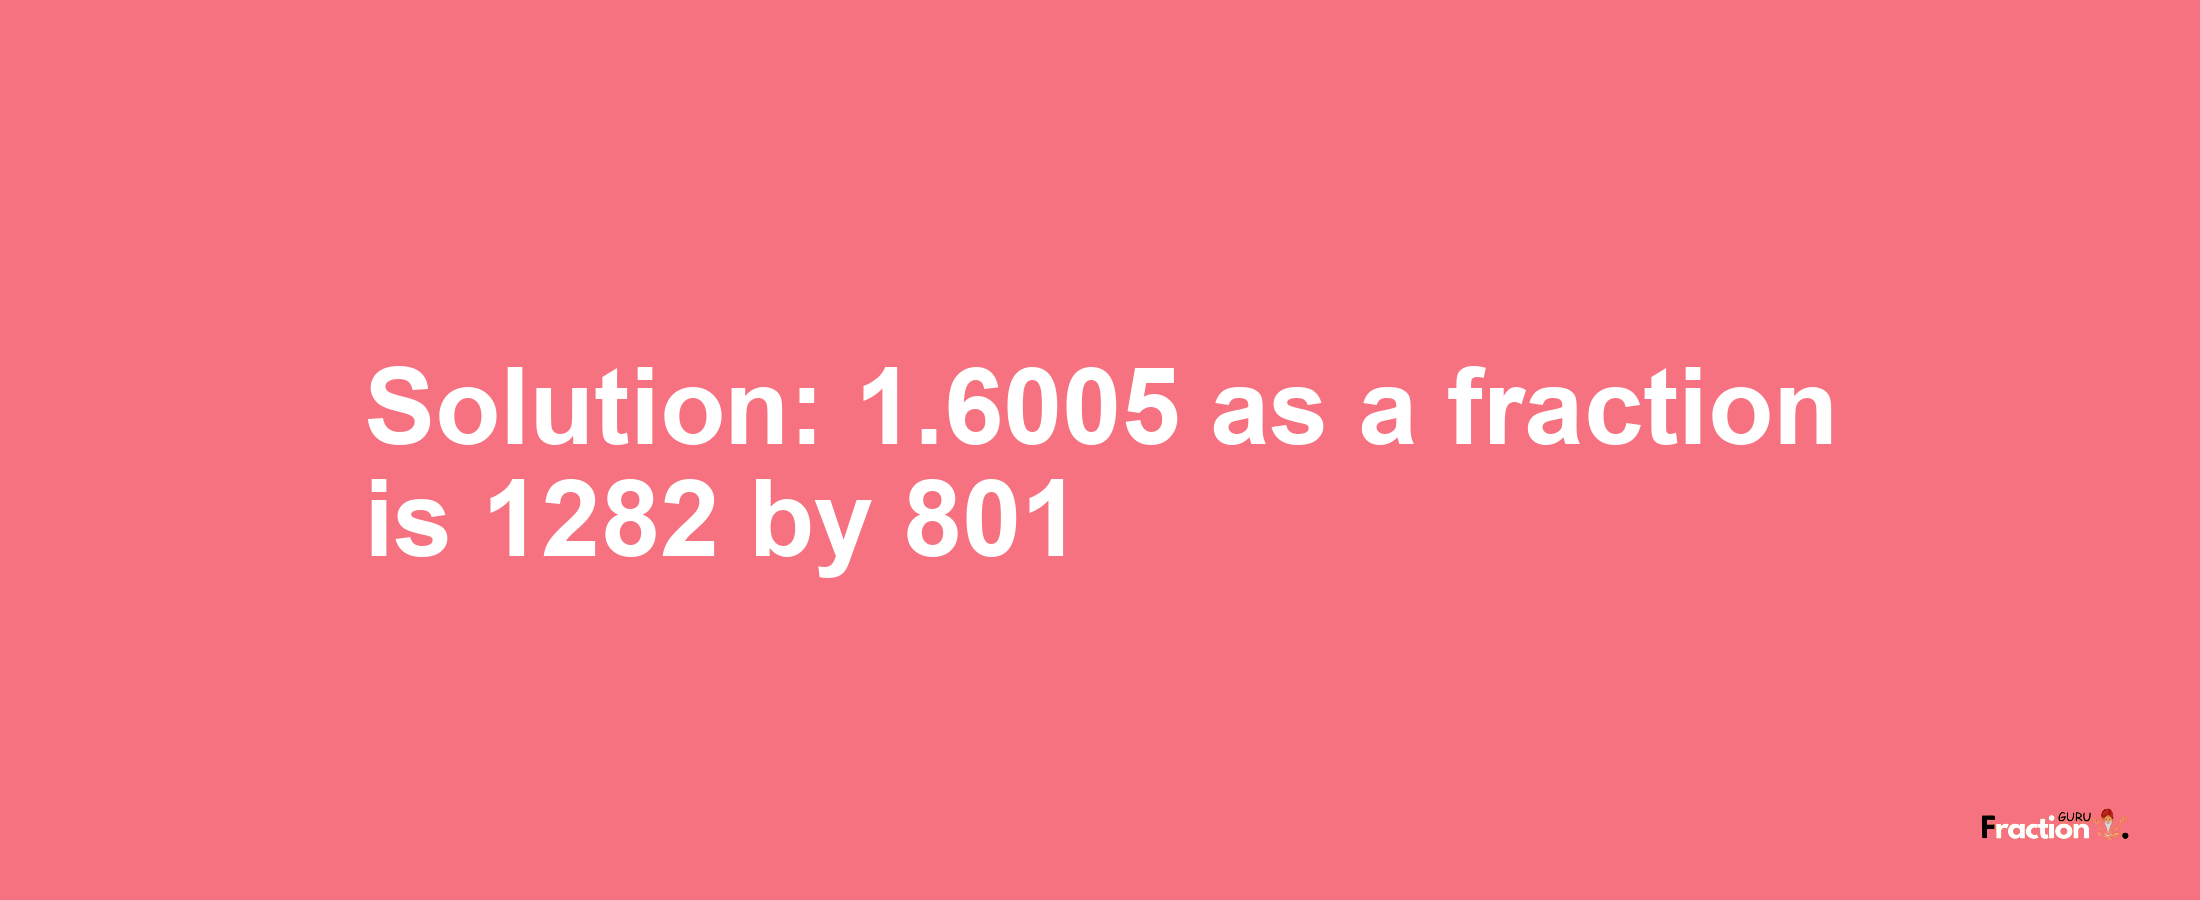 Solution:1.6005 as a fraction is 1282/801